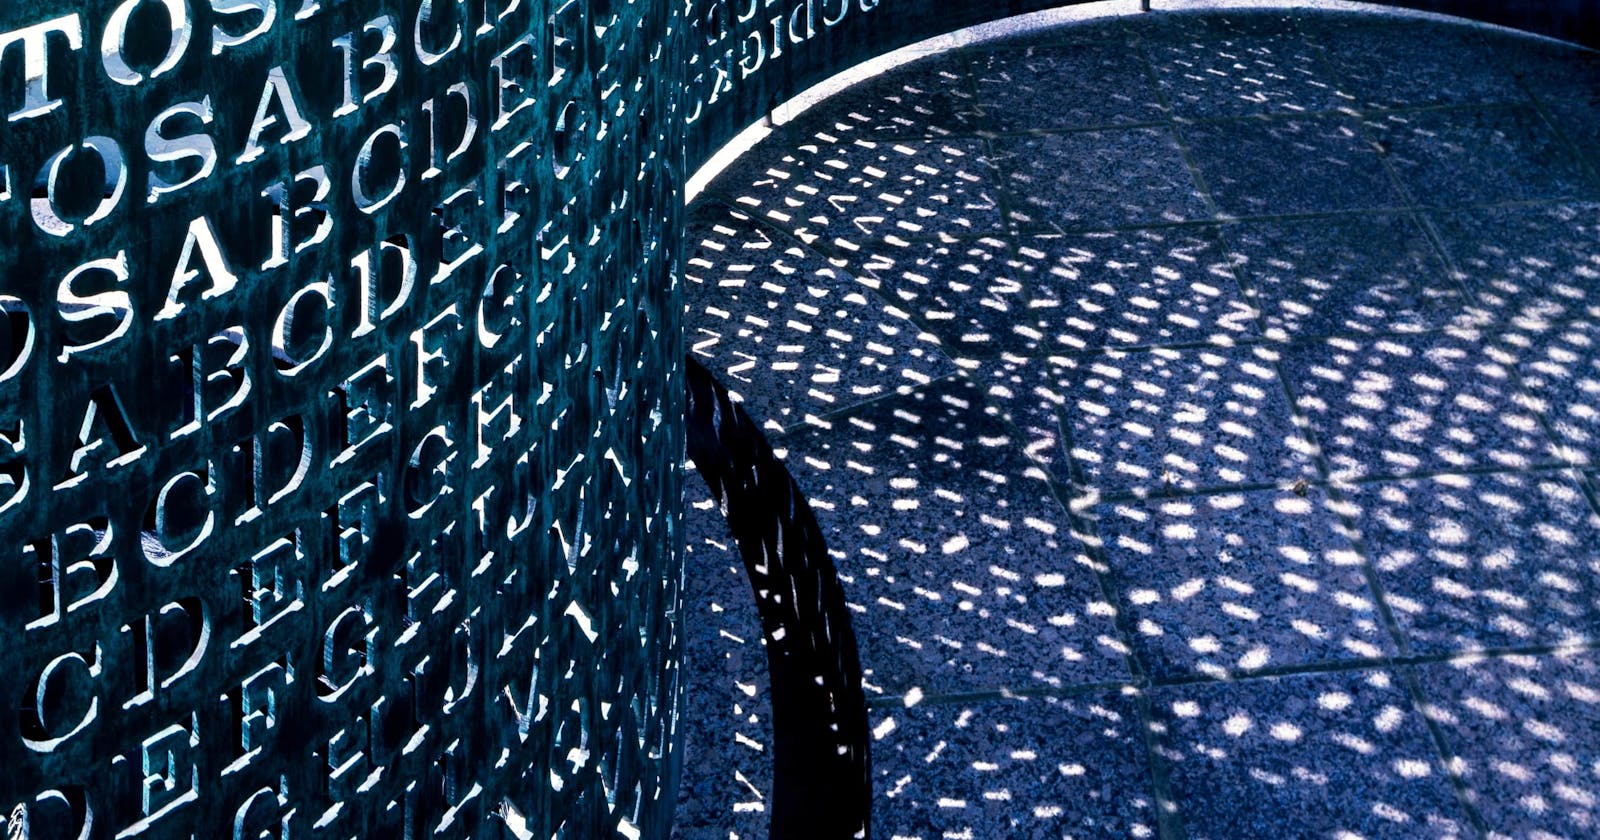 A Fresh Perspective on Kryptos K4, the Decades-Old Unsolved Code